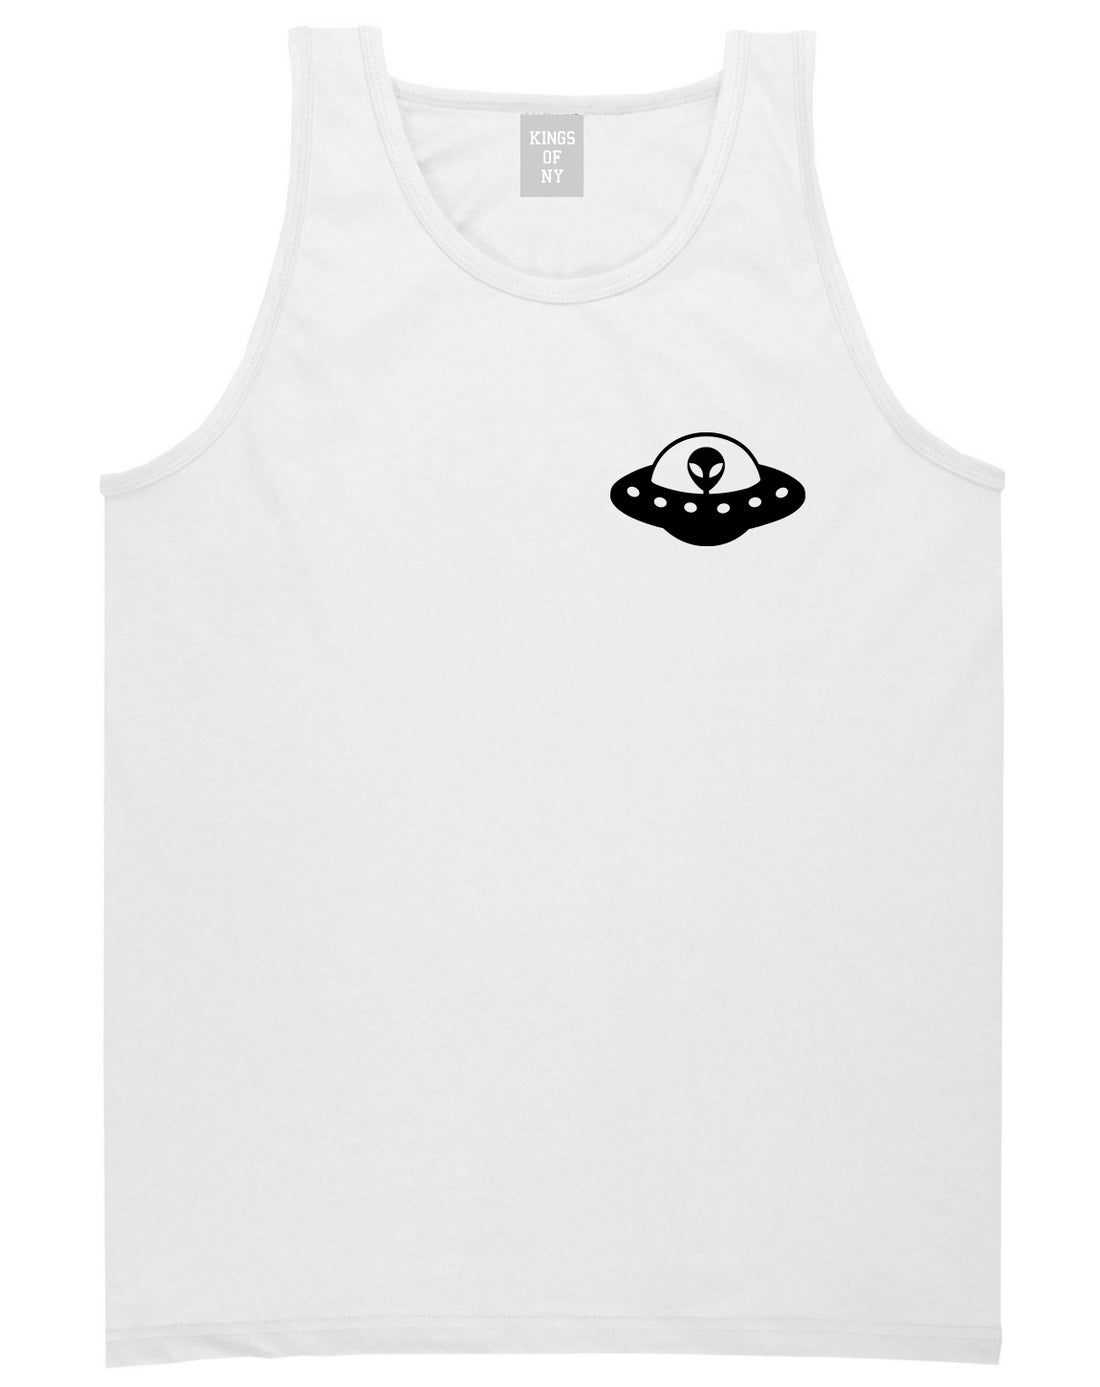 Alien_Spaceship_Chest Mens White Tank Top Shirt by Kings Of NY